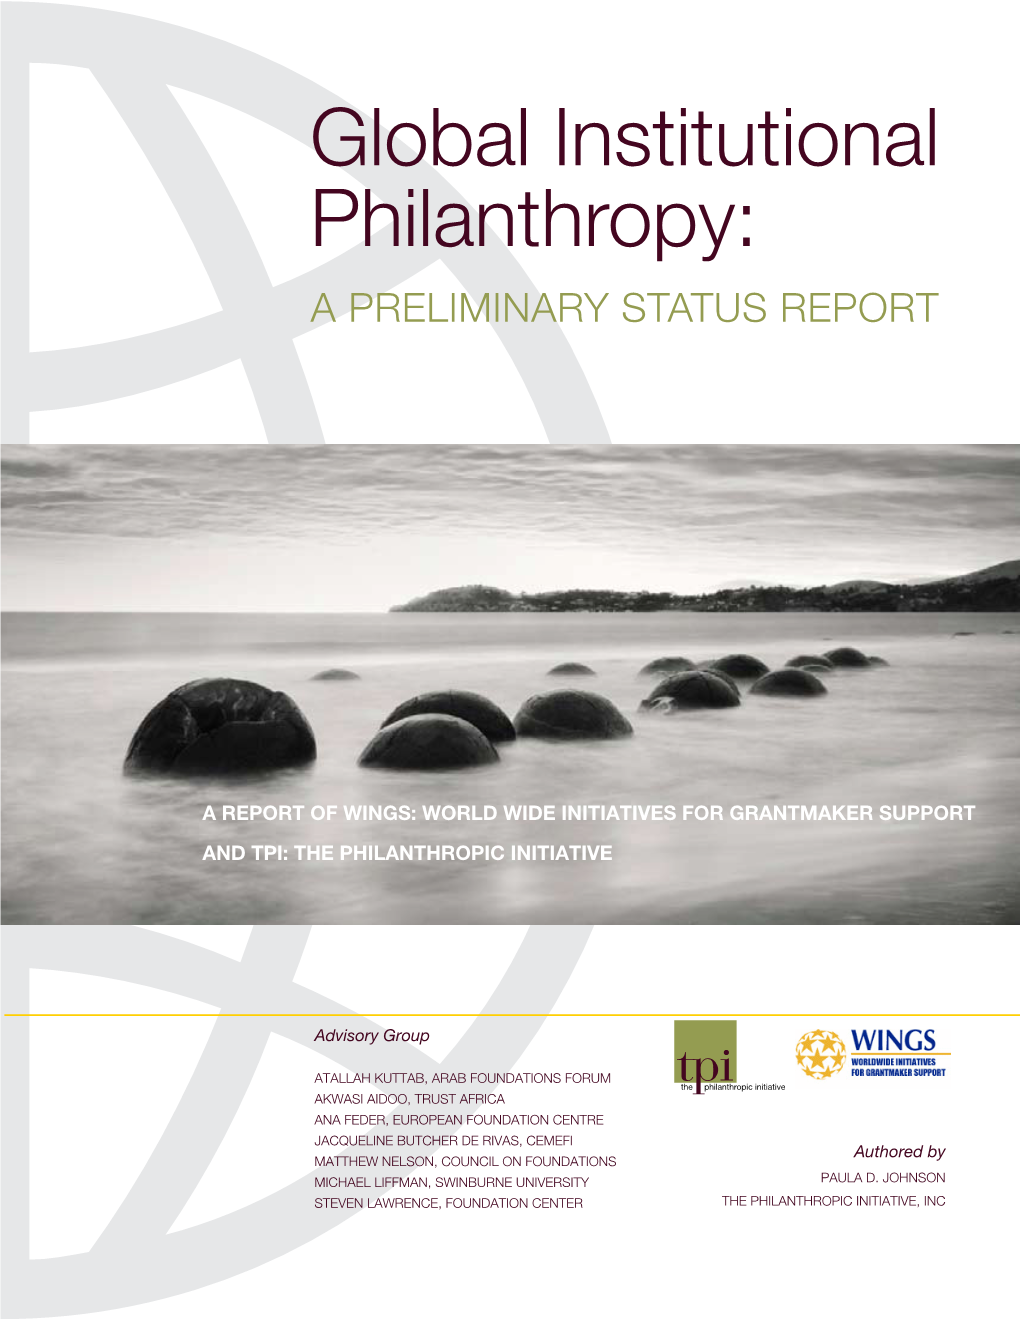 Global Institutional Philanthropy: a Preliminary Status Report